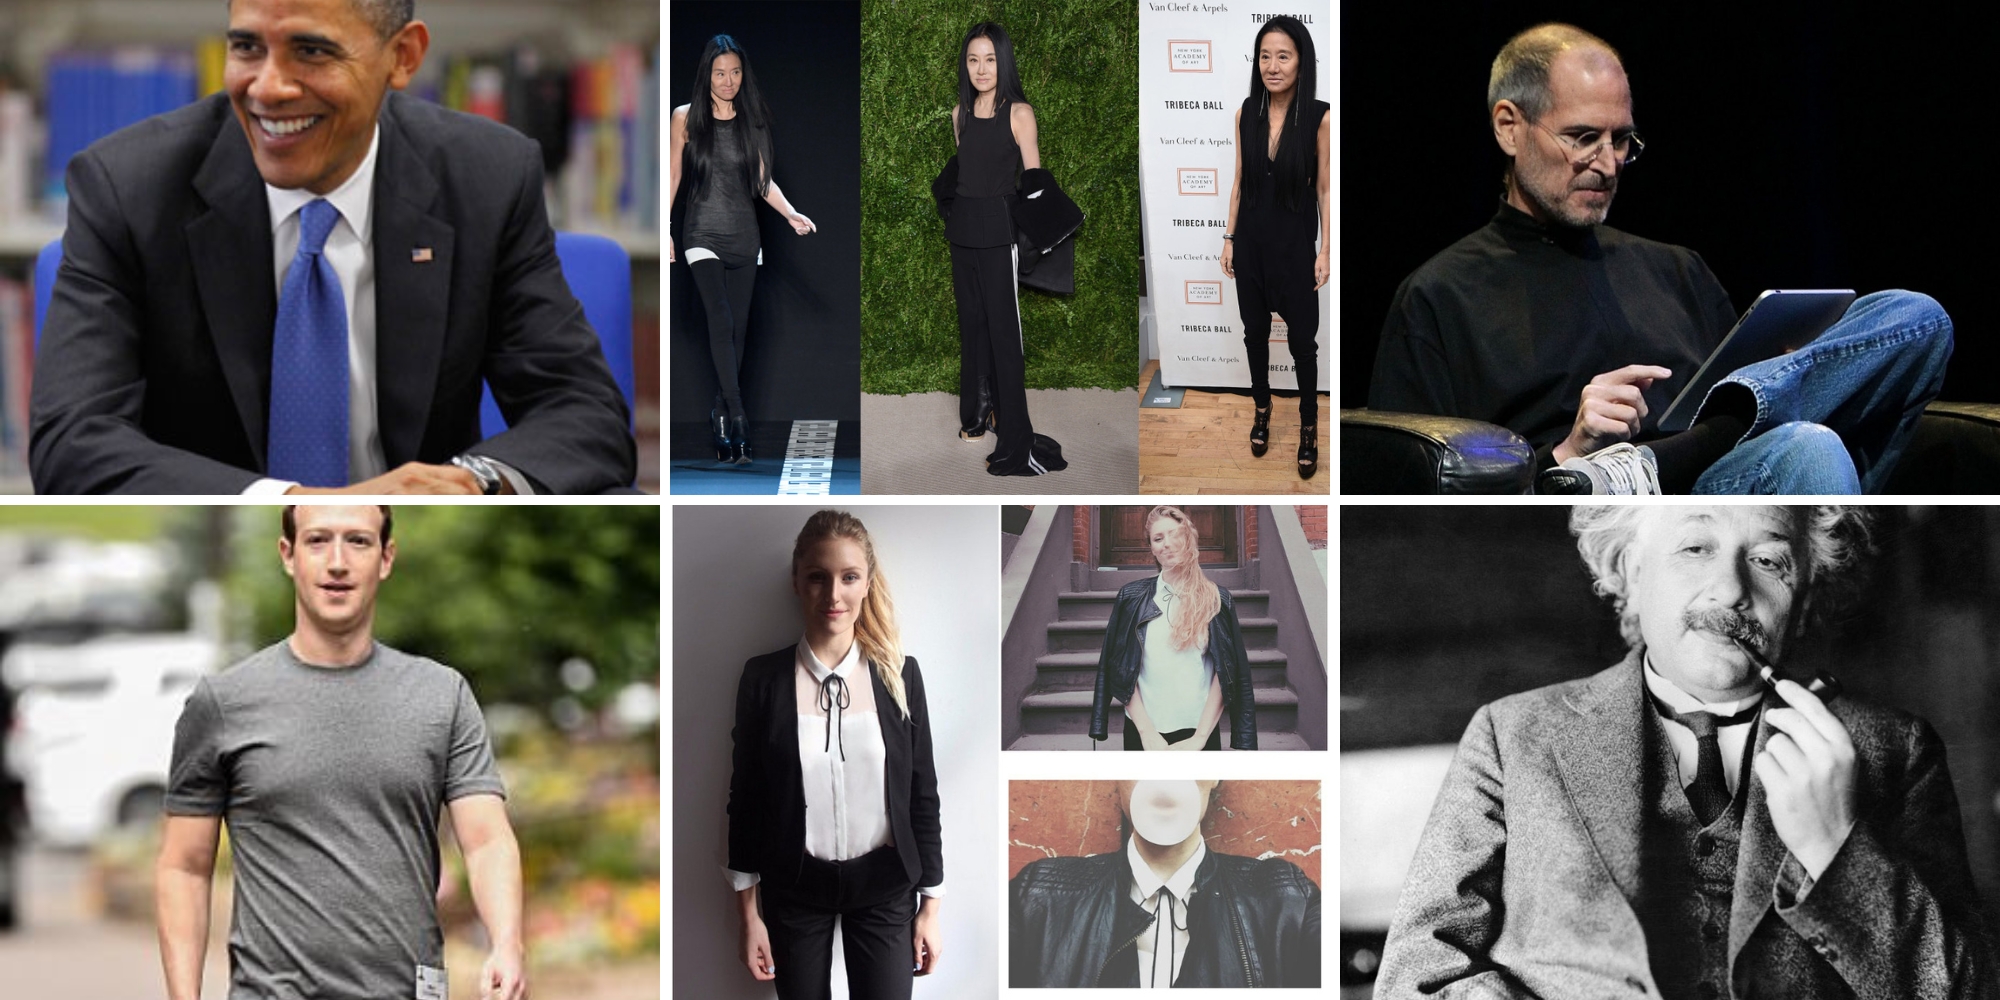 Matilda Kahl wore the same outfit to work every day for three years